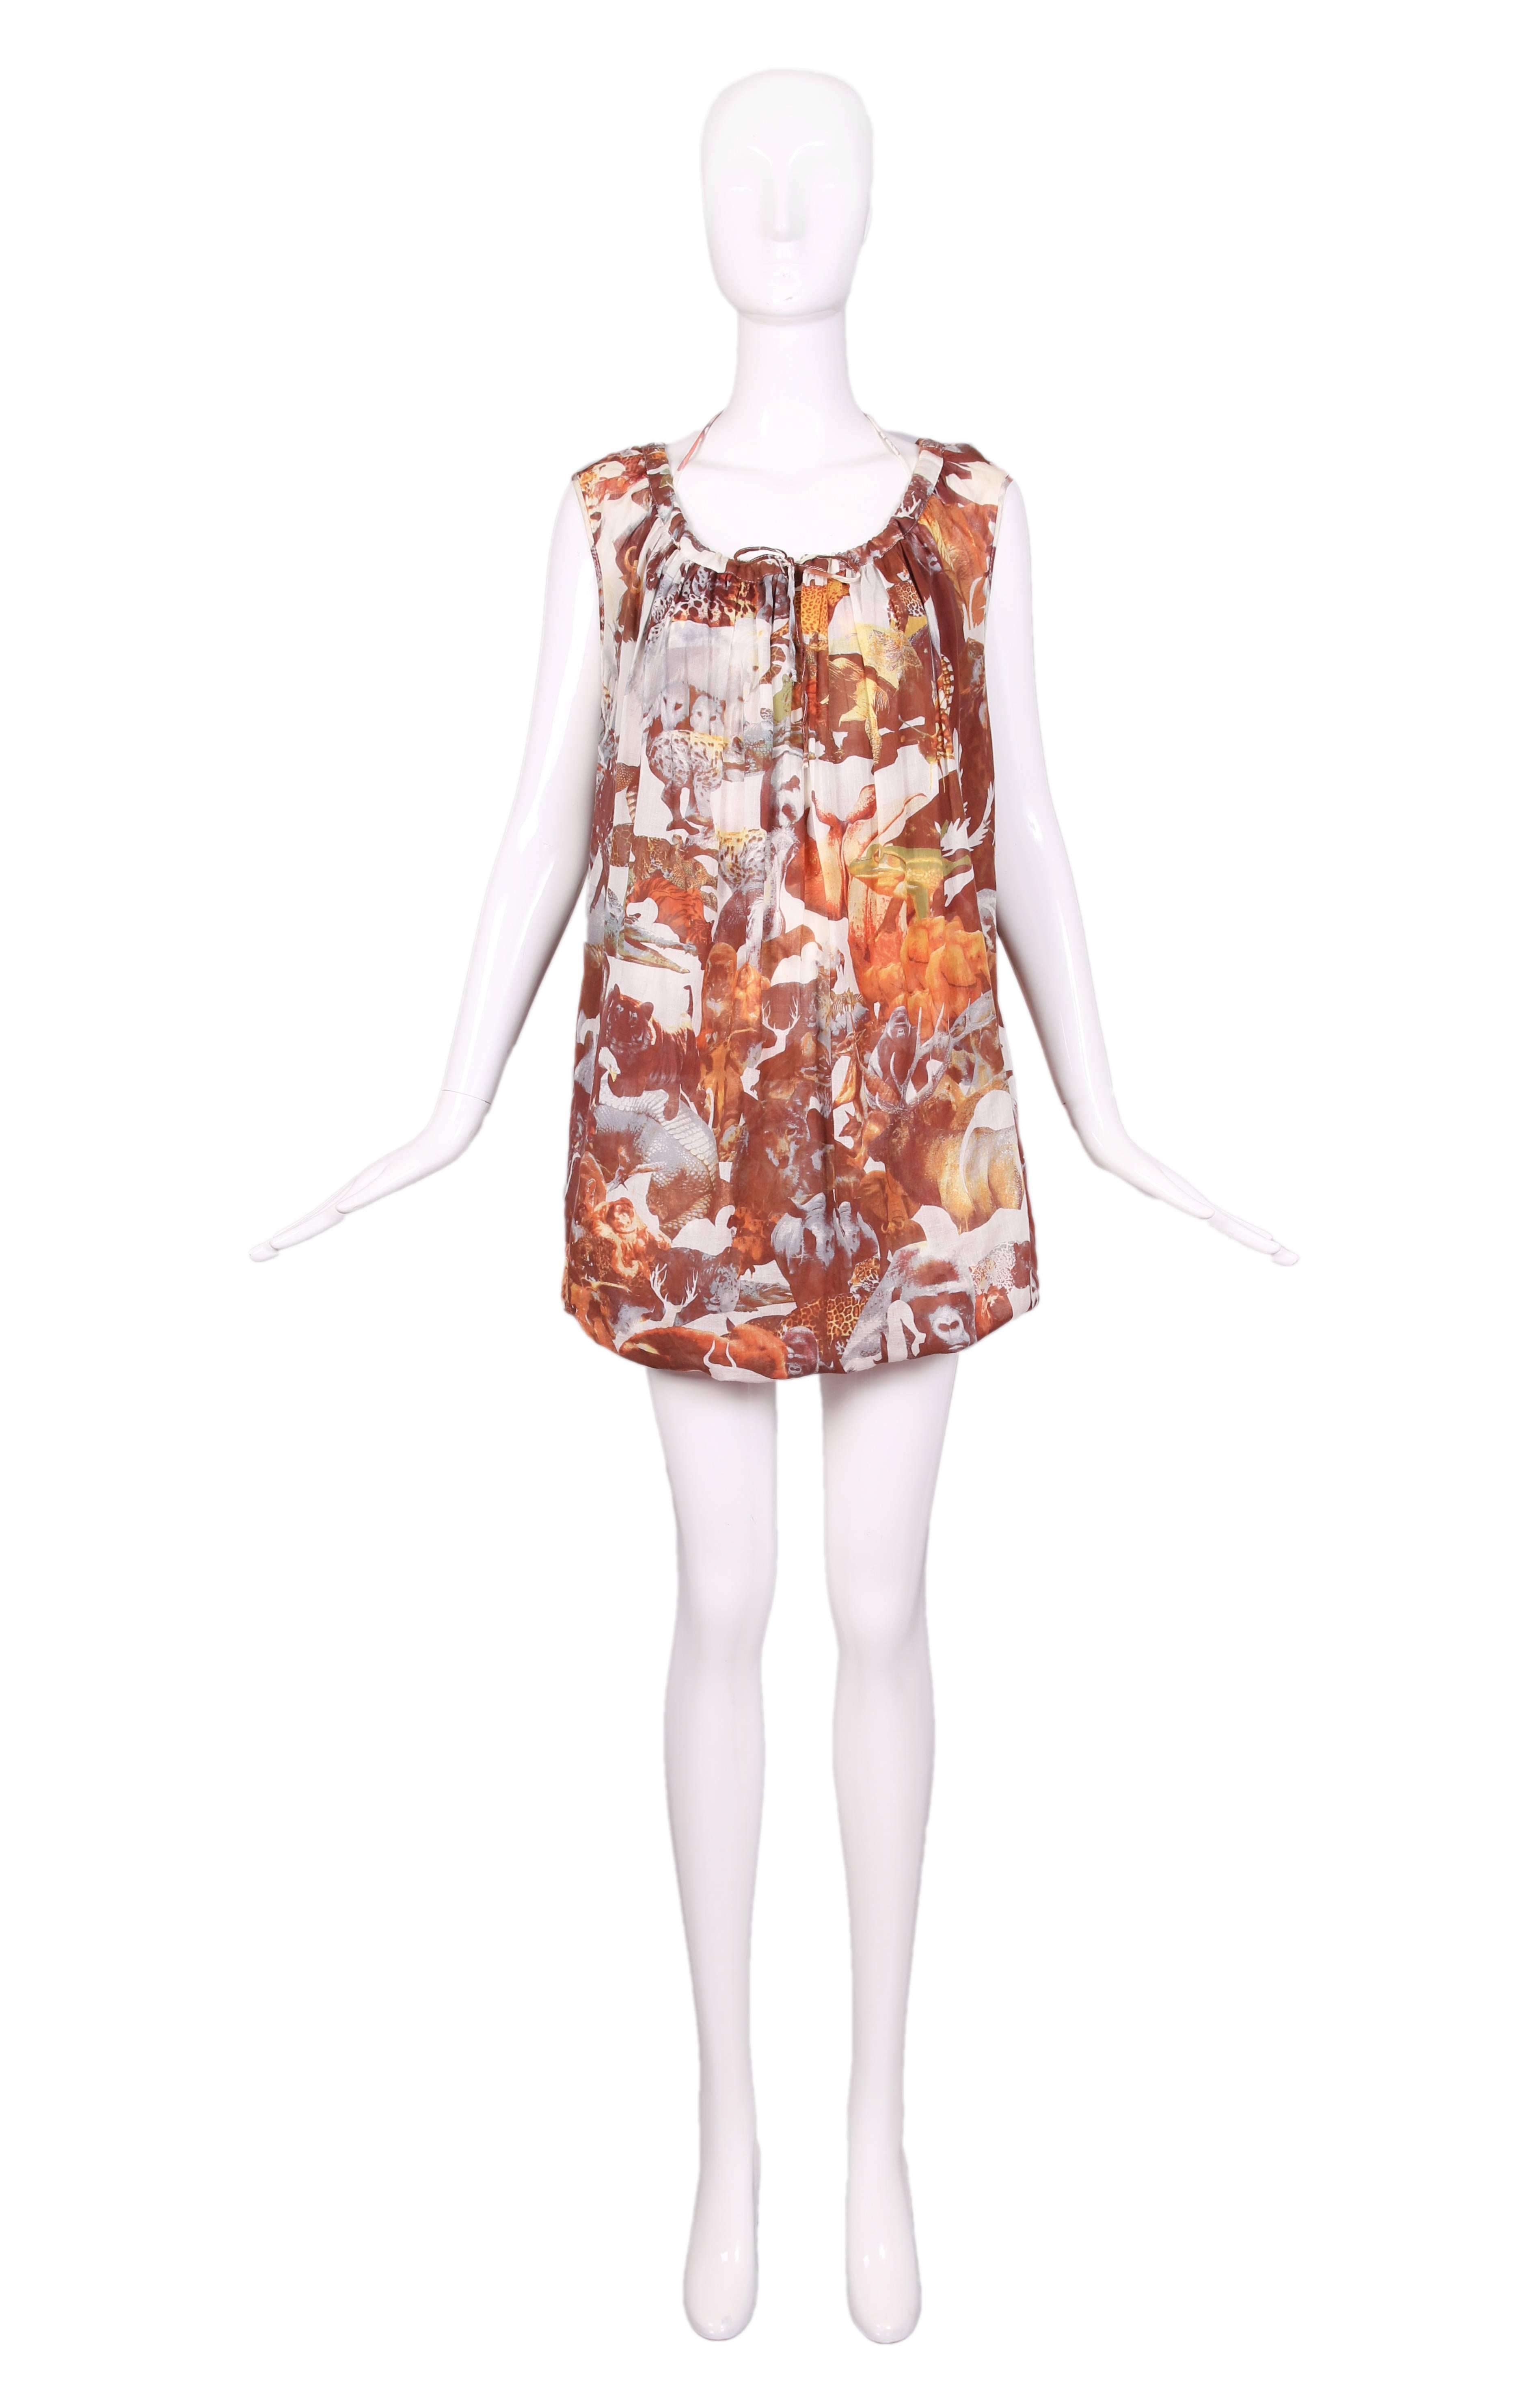 Hussein Chalayan cotton jungle print sleeveless pillowcase bubble dress with halter underlining. In excellent condition. Size 6.
MEASUREMENTS (in inches):
Bust - 32
Waist - Free
Hip - Free
Length - 28